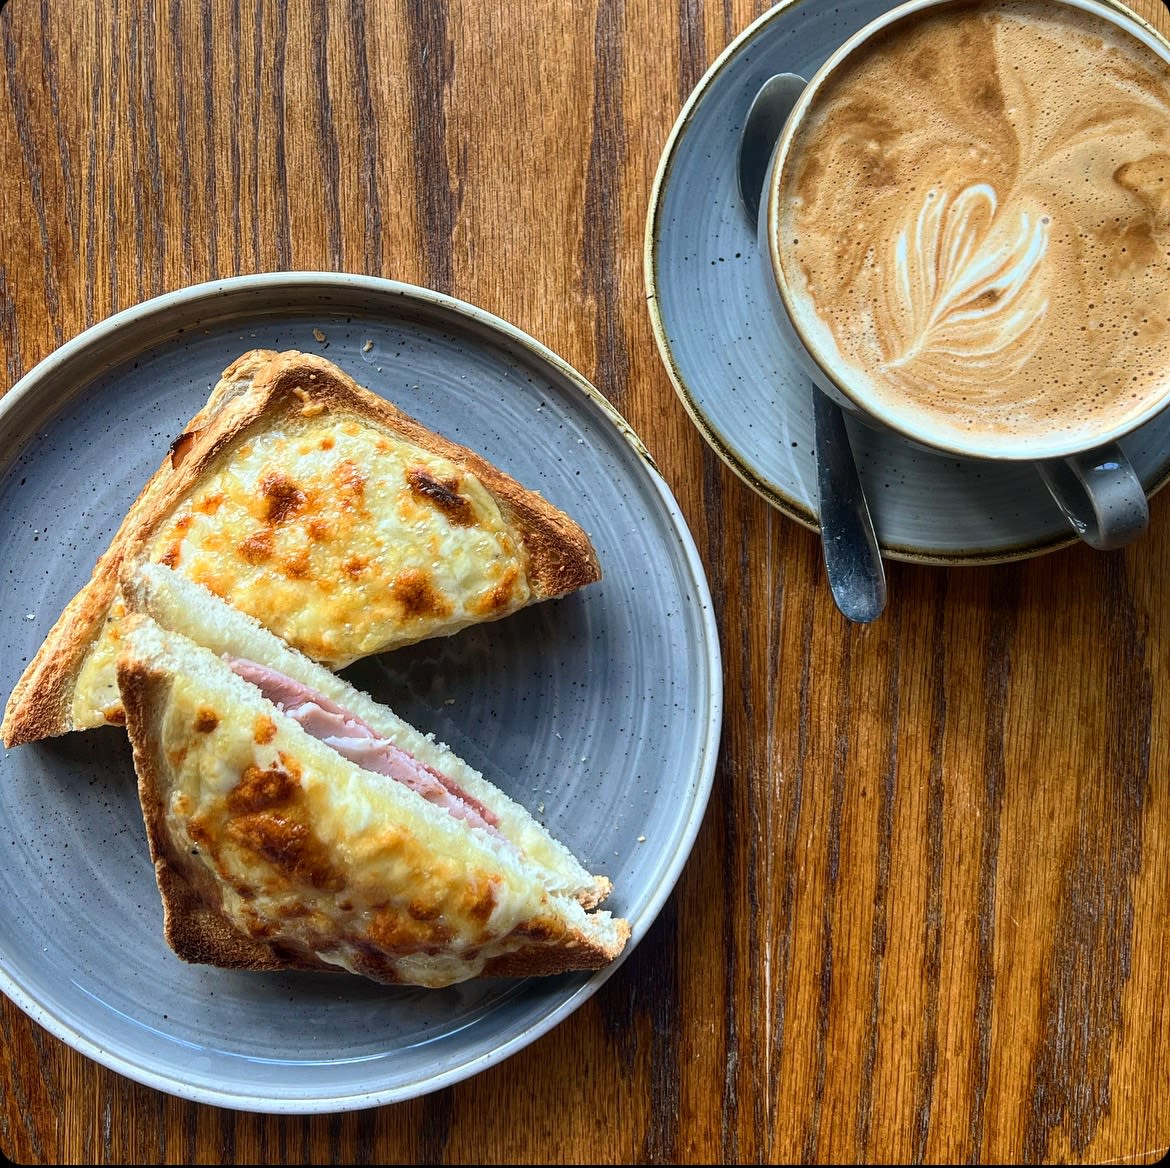 Lunch time alert 🤤
.
Croque Monsieur
- top it up with egg or/and chips !
//
Pop in and enjoy our delicious options! 
.
#tulsehillhotel #tulsehill #hernehill #se24 #gastropub